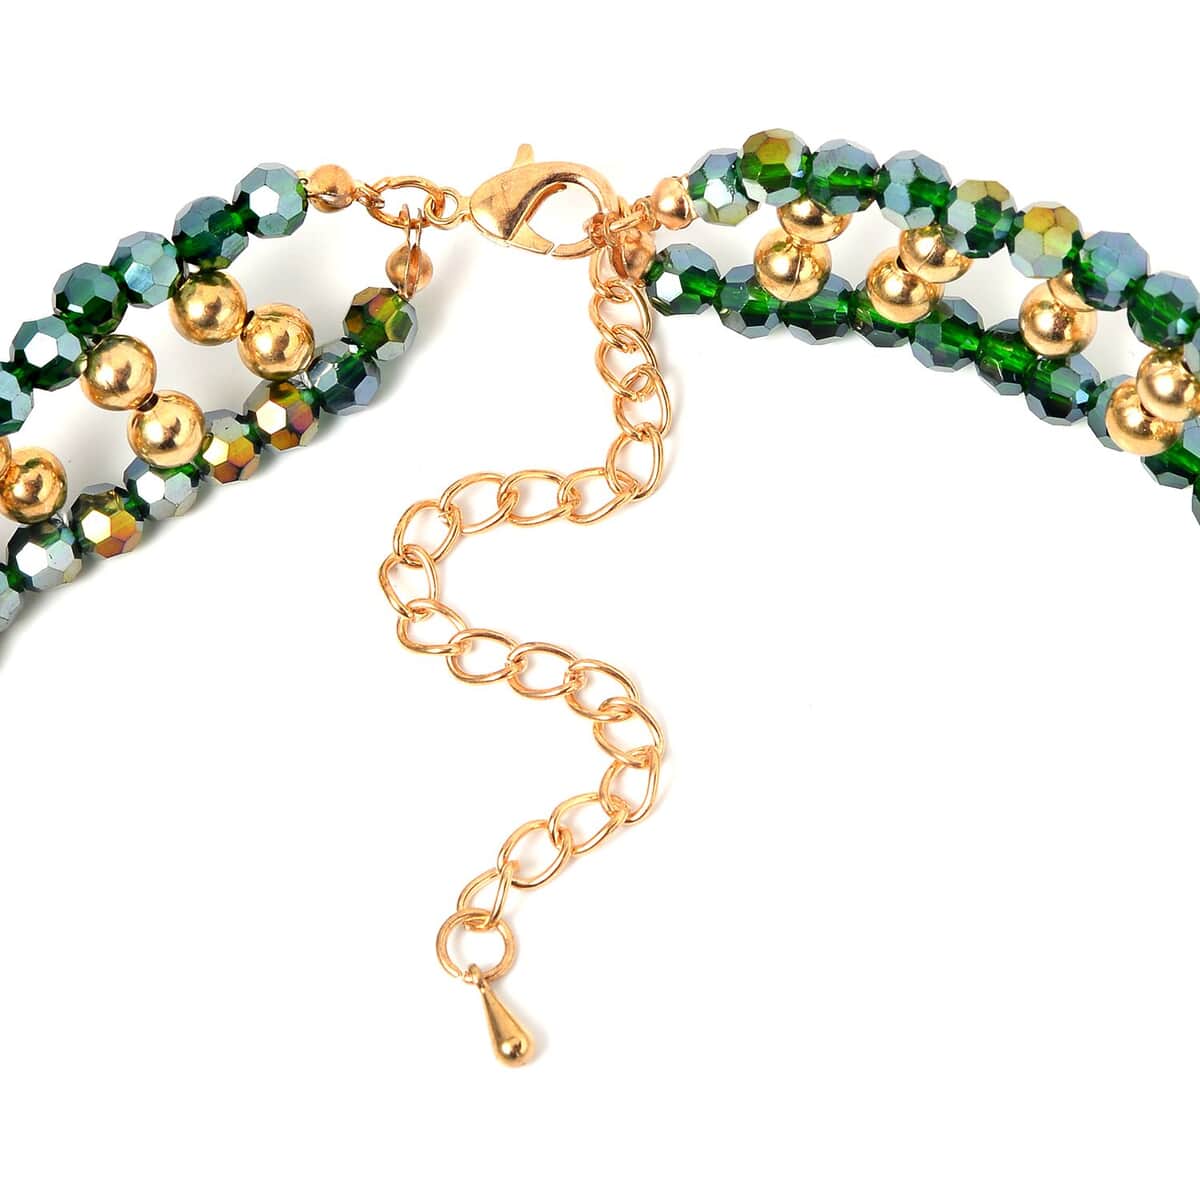 Green Glass, Resin Waterfall Necklace 16-20 Inches and Earrings in Goldtone & Stainless Steel image number 3